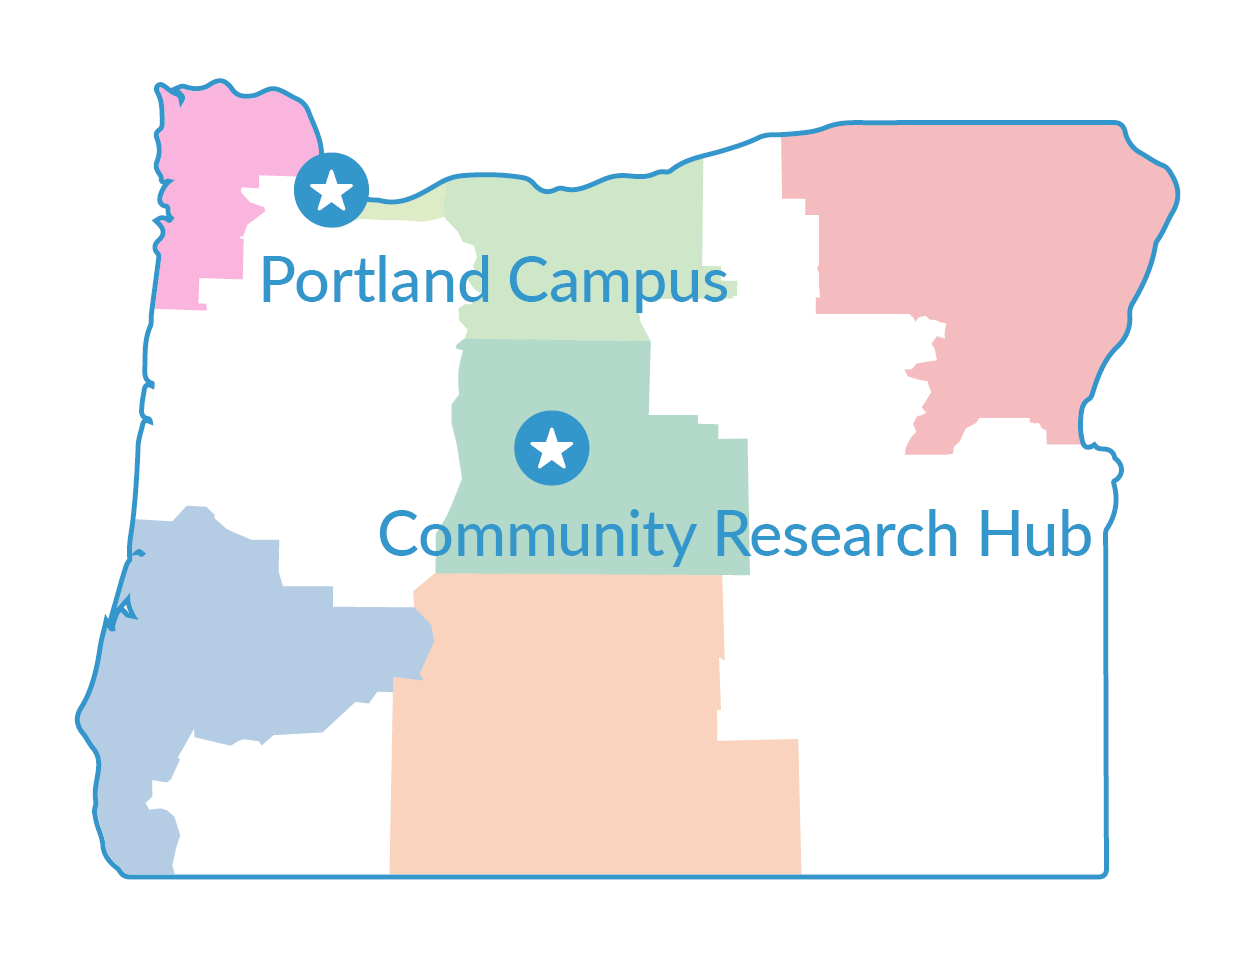 Map of Oregon with OCTRI headquarters labeled near Portland and OCTRI Community Research Hub labeled near Bend.